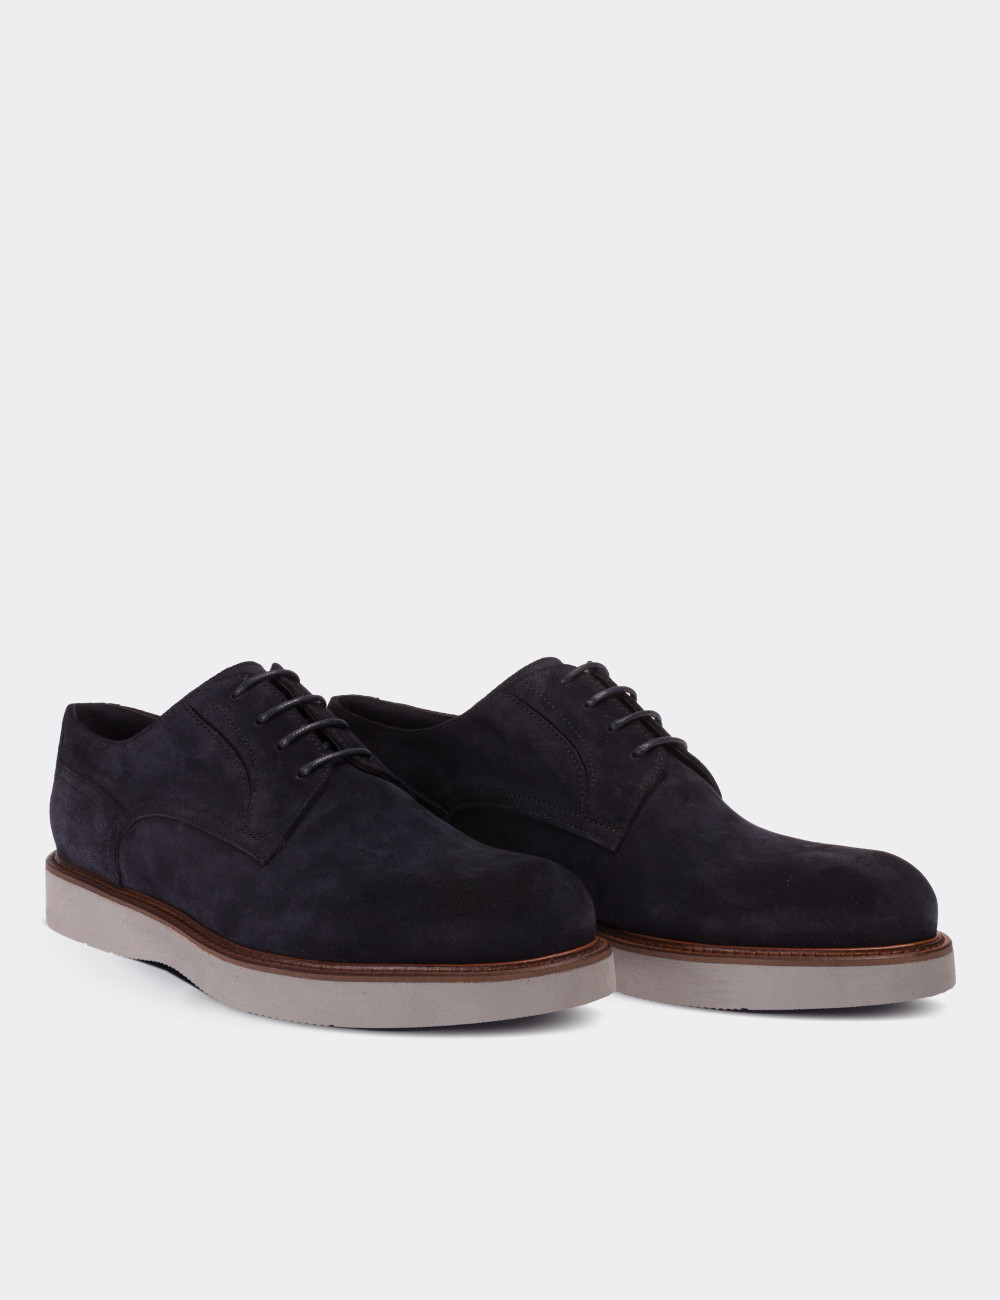 Navy Suede Leather Lace-up Shoes - 01294MLCVE09